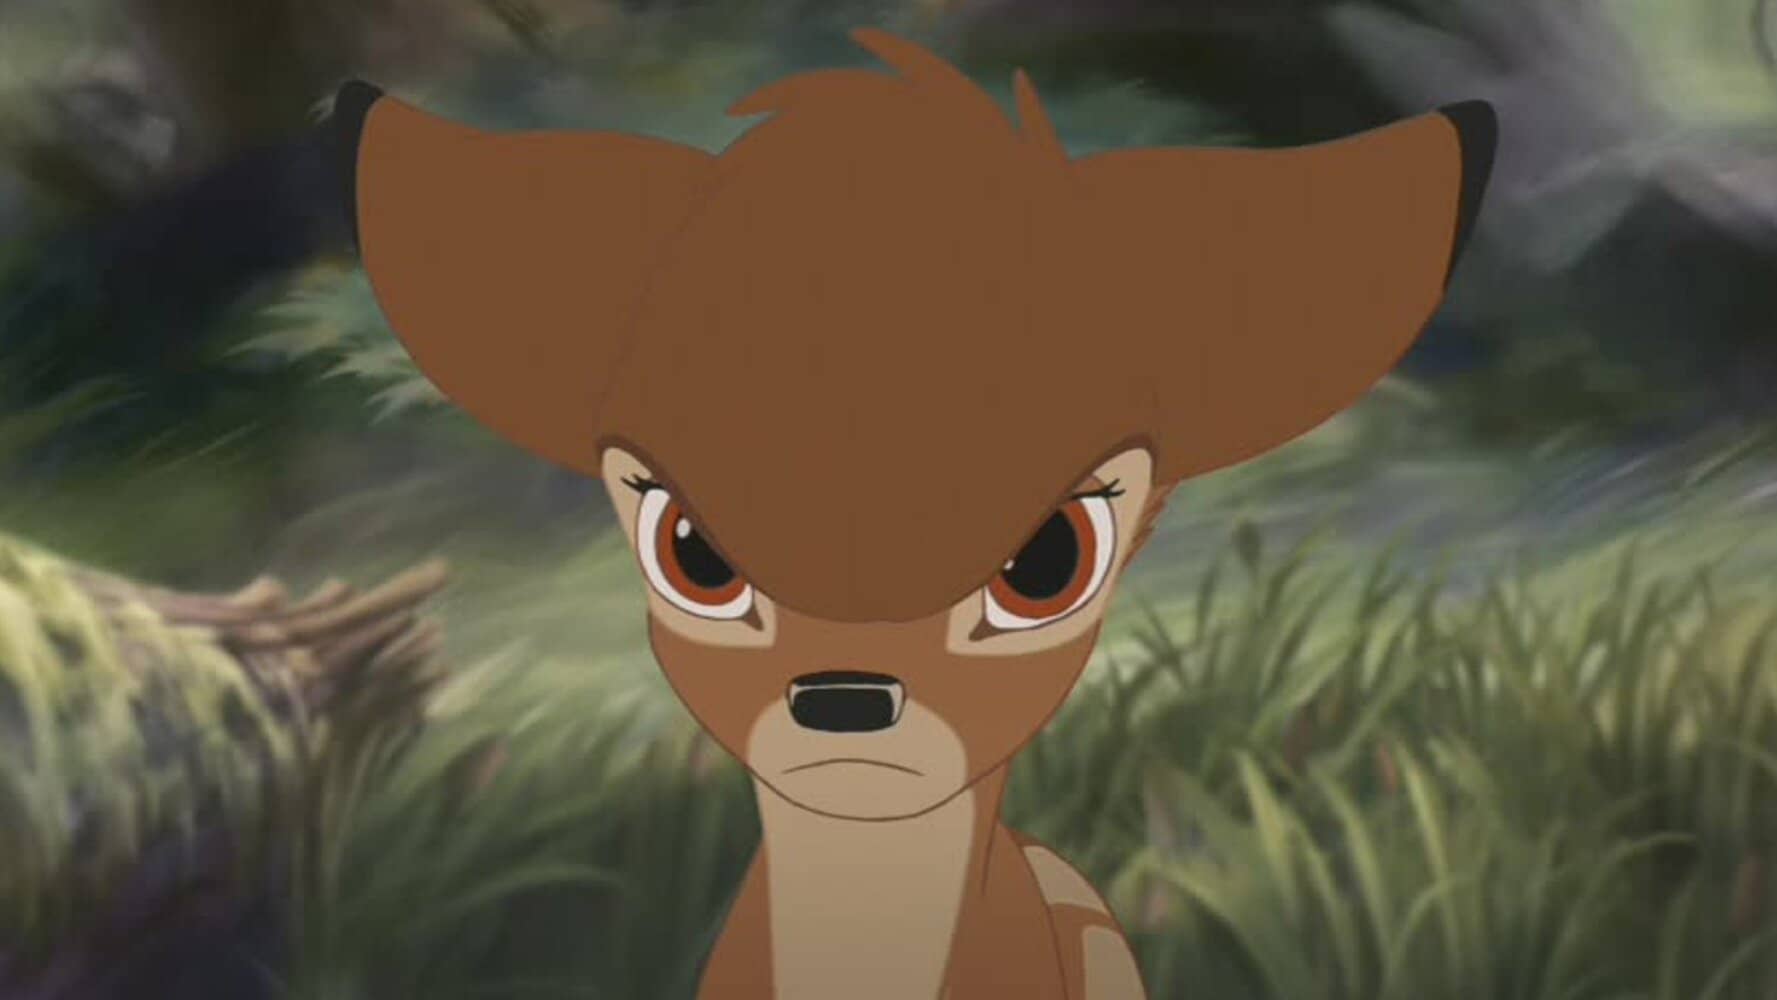 Why Bambi II is better than Bambi.